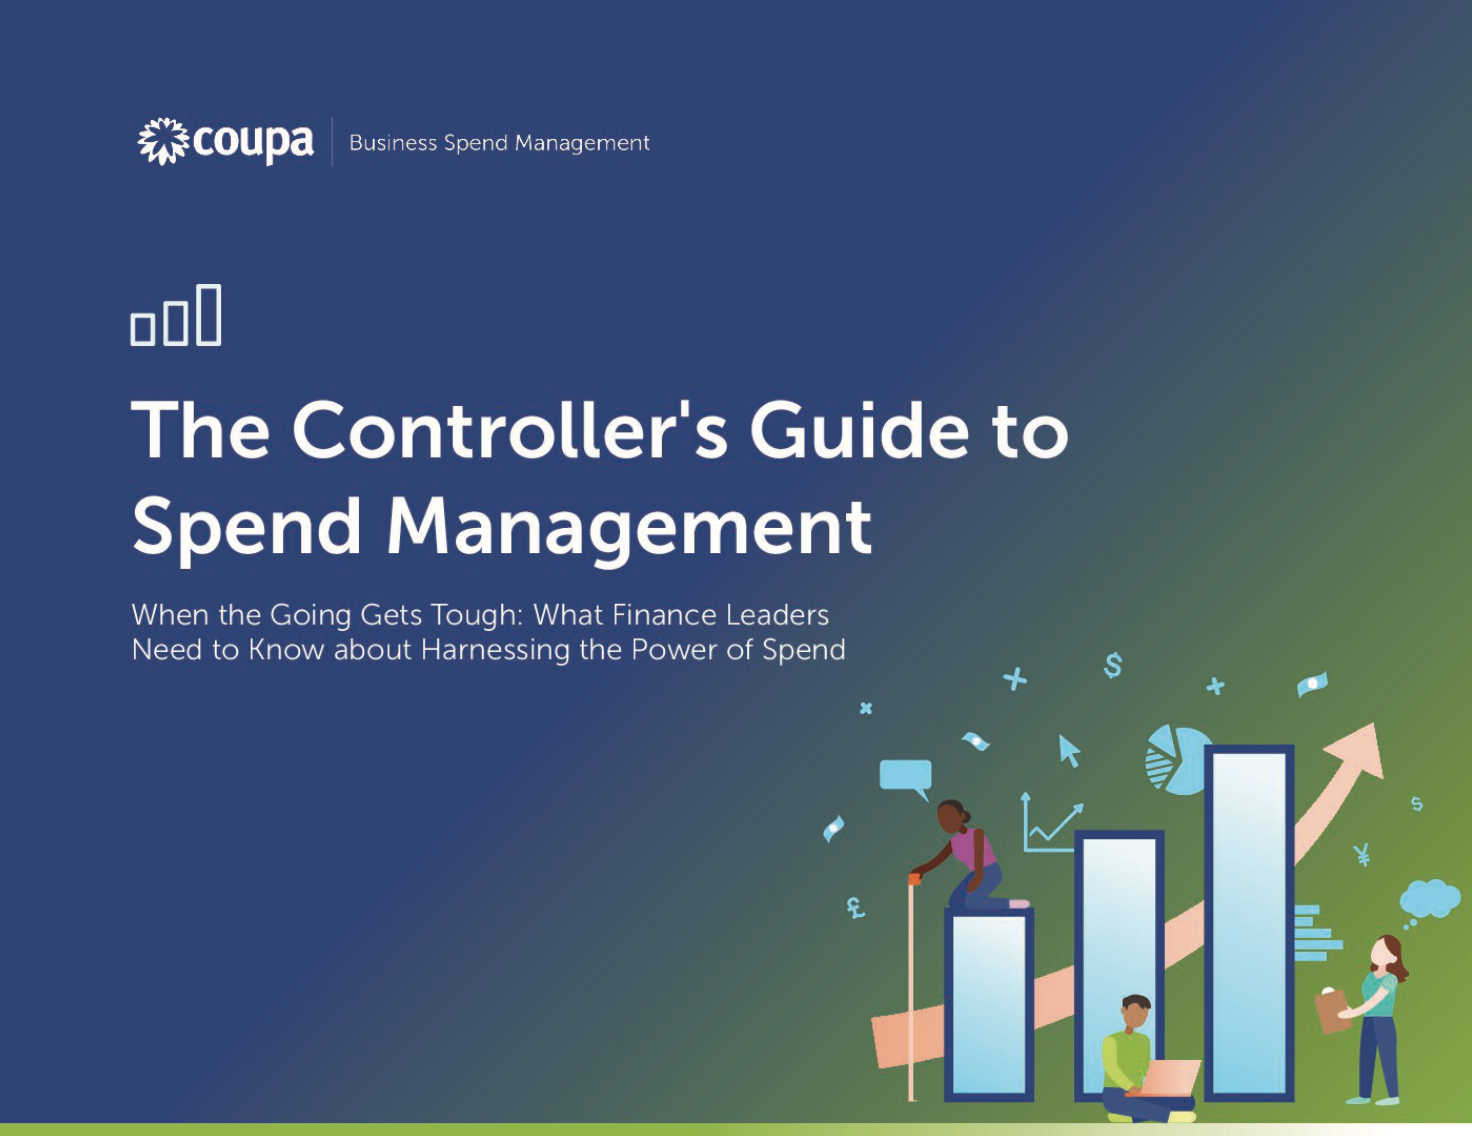 spend management guide